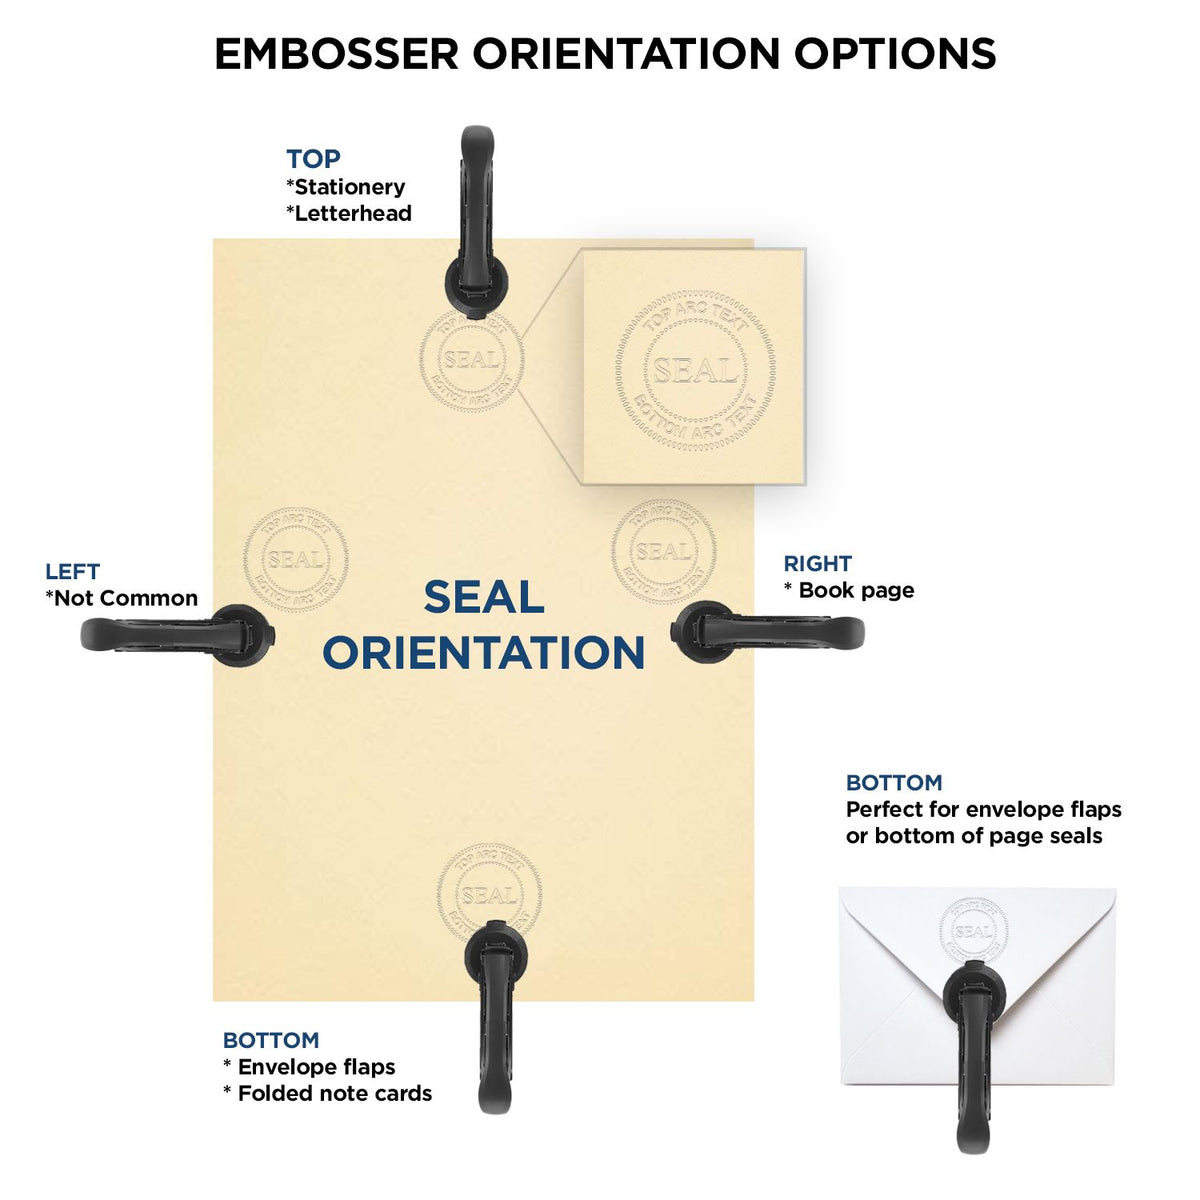 An infographic for the Long Reach New York PE Seal showing embosser orientation, this is showing examples of a top, bottom, right and left insert.